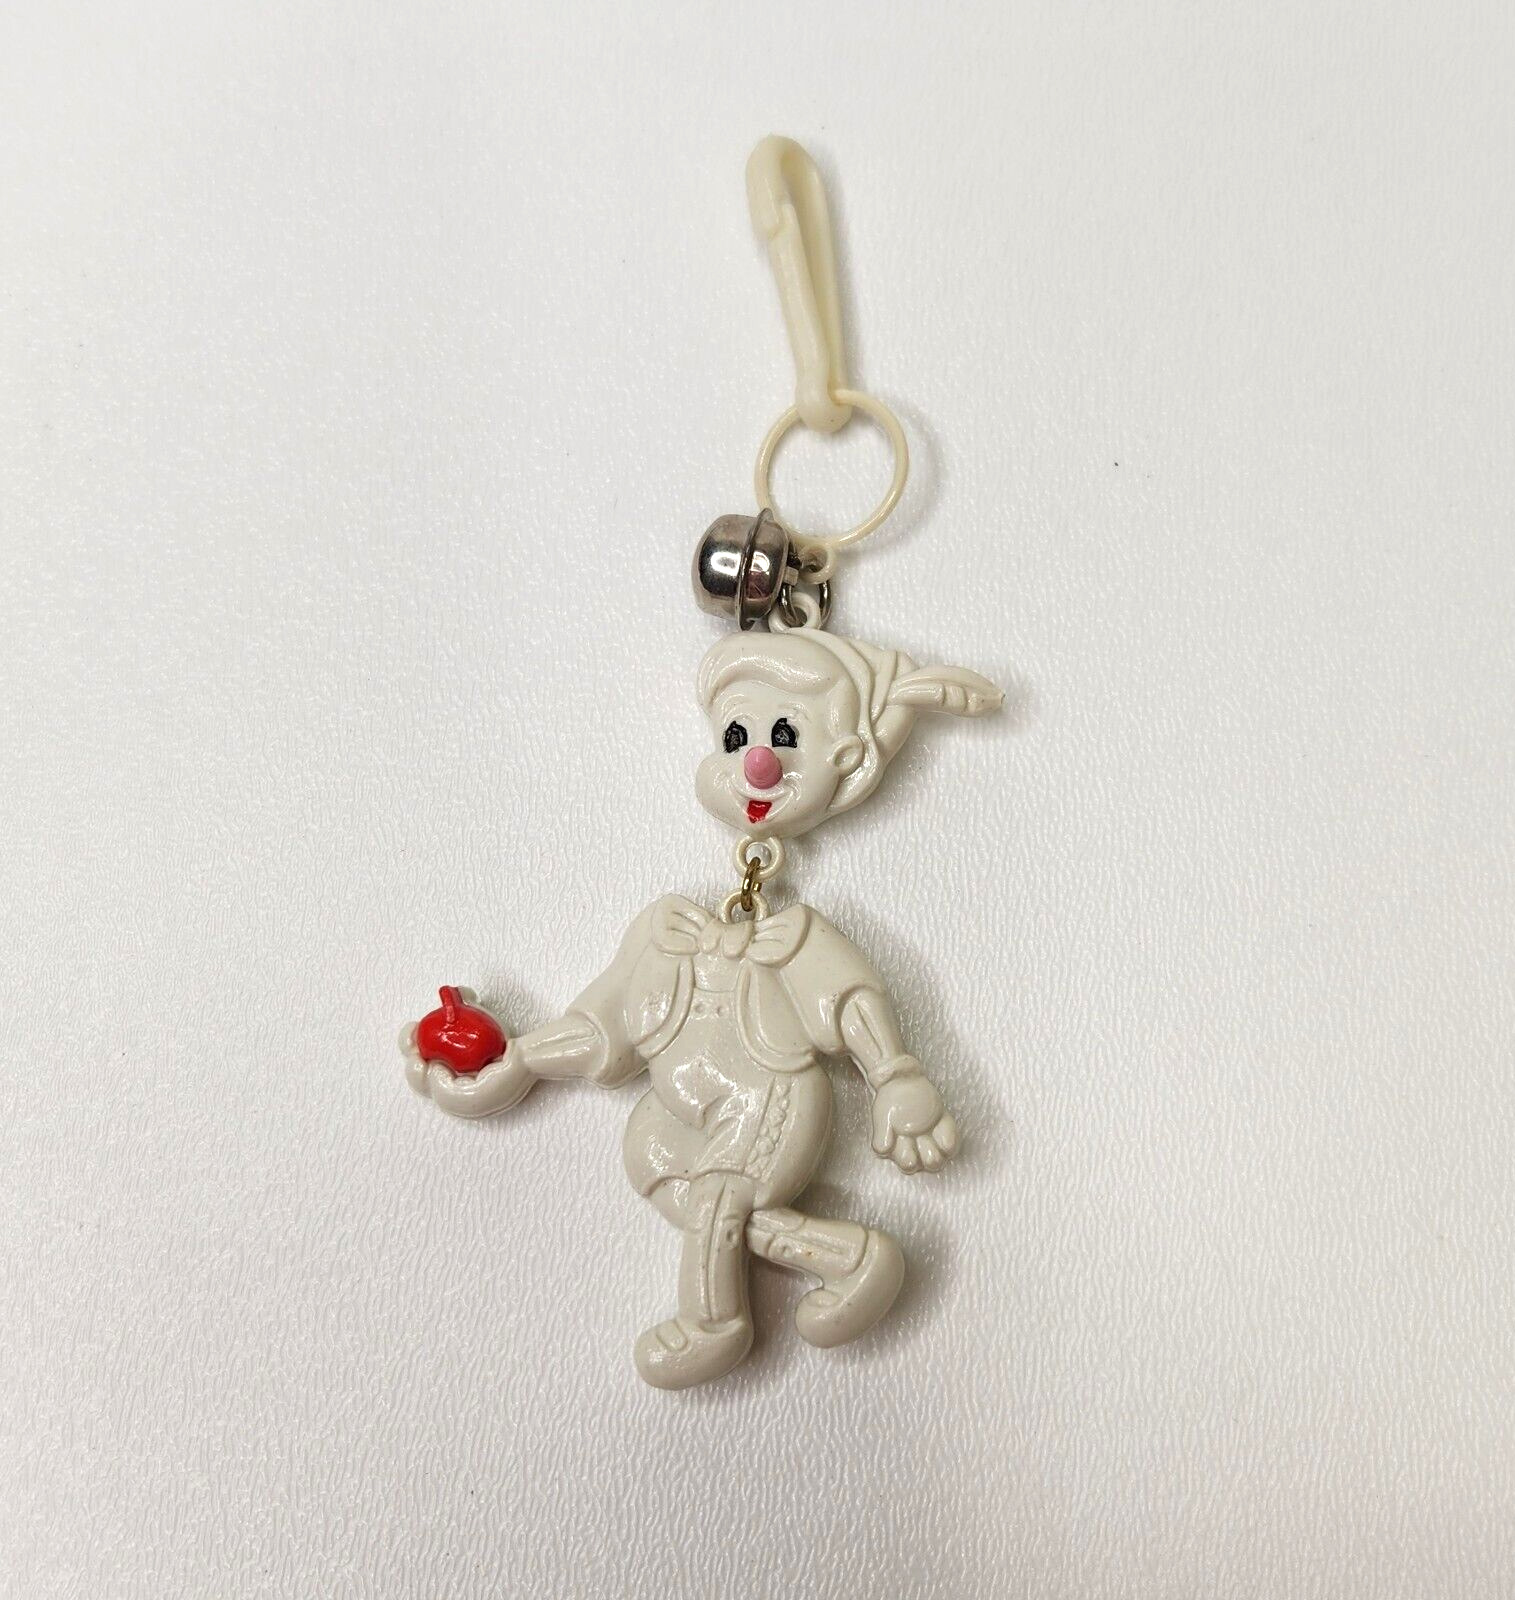 Vintage 1980s Plastic Bell Charm Clown For 80s Necklace